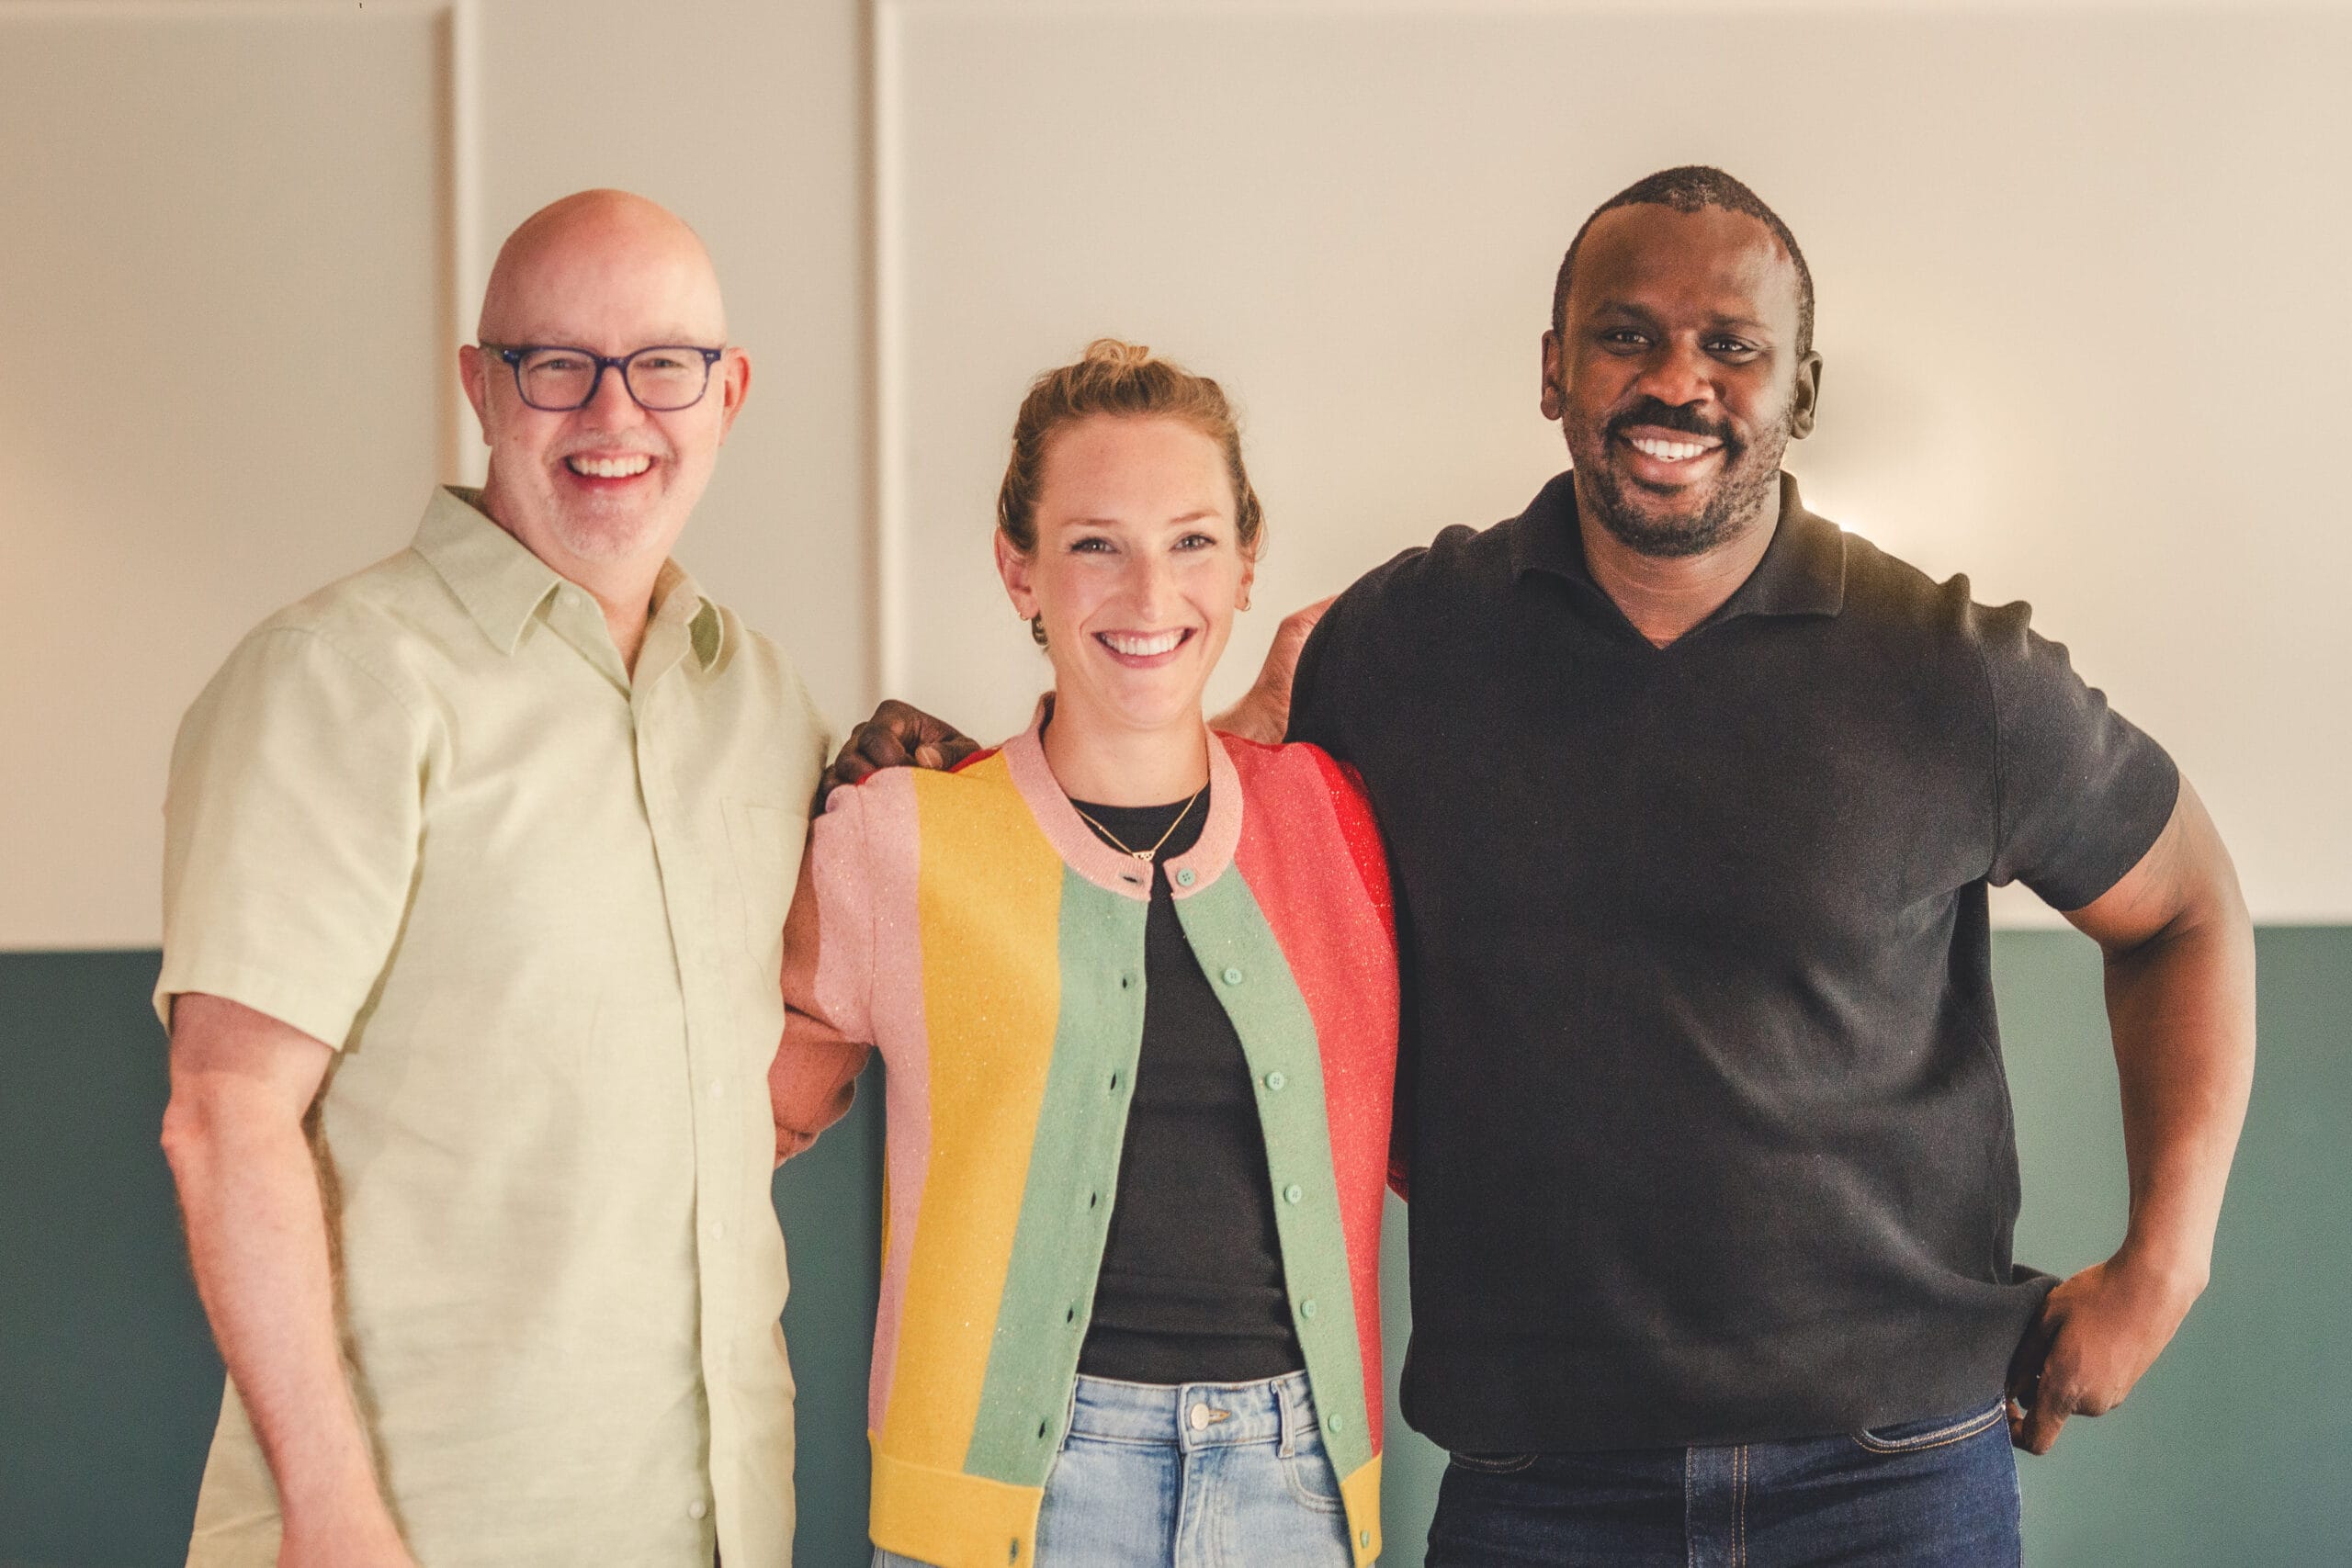 A man in a button up polo wearing glasses, a women in a striped cardigan and a man with a beard wearing a polo shirt with their arms behind eachother  all smile